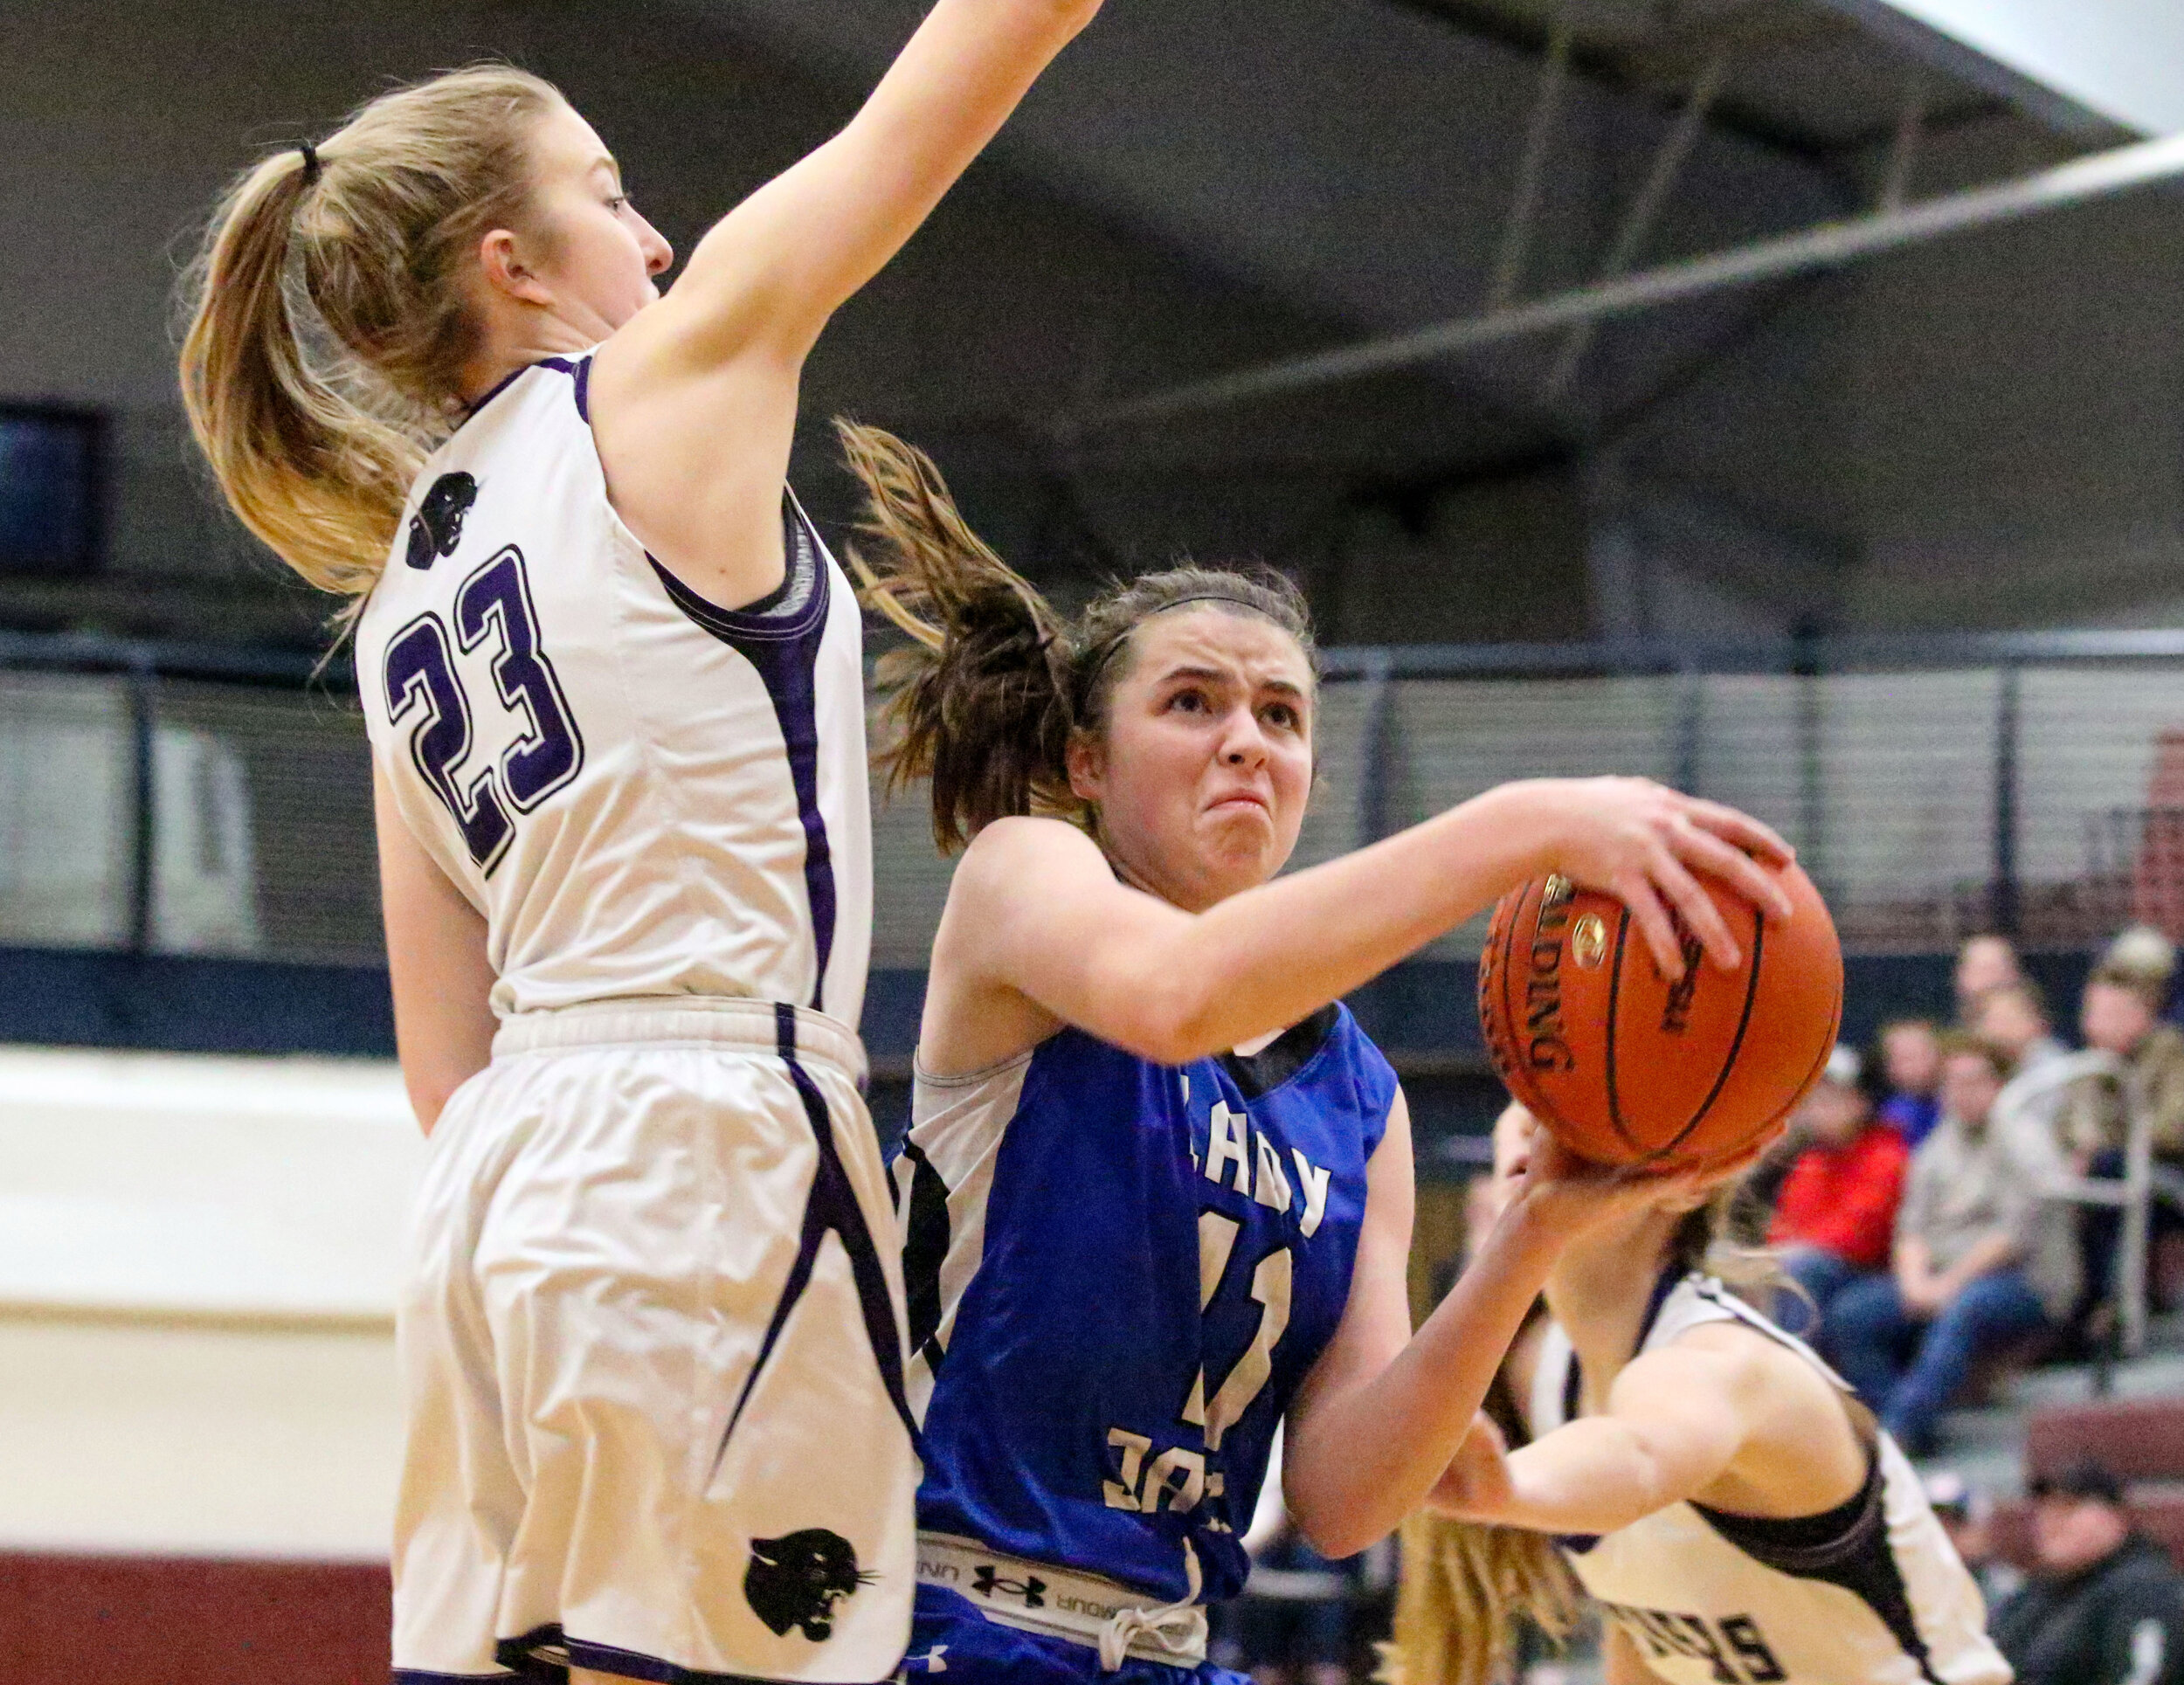  Whitesville freshman Vanessa Hall (11) drives her way up to the basket against the defense of Andover junior Kelsie Niedermaier (23) during Monday night’s Class D2 Semifinal at Wayland-Cohocton. [Chris Brooks/WellsvilleSports.com] 